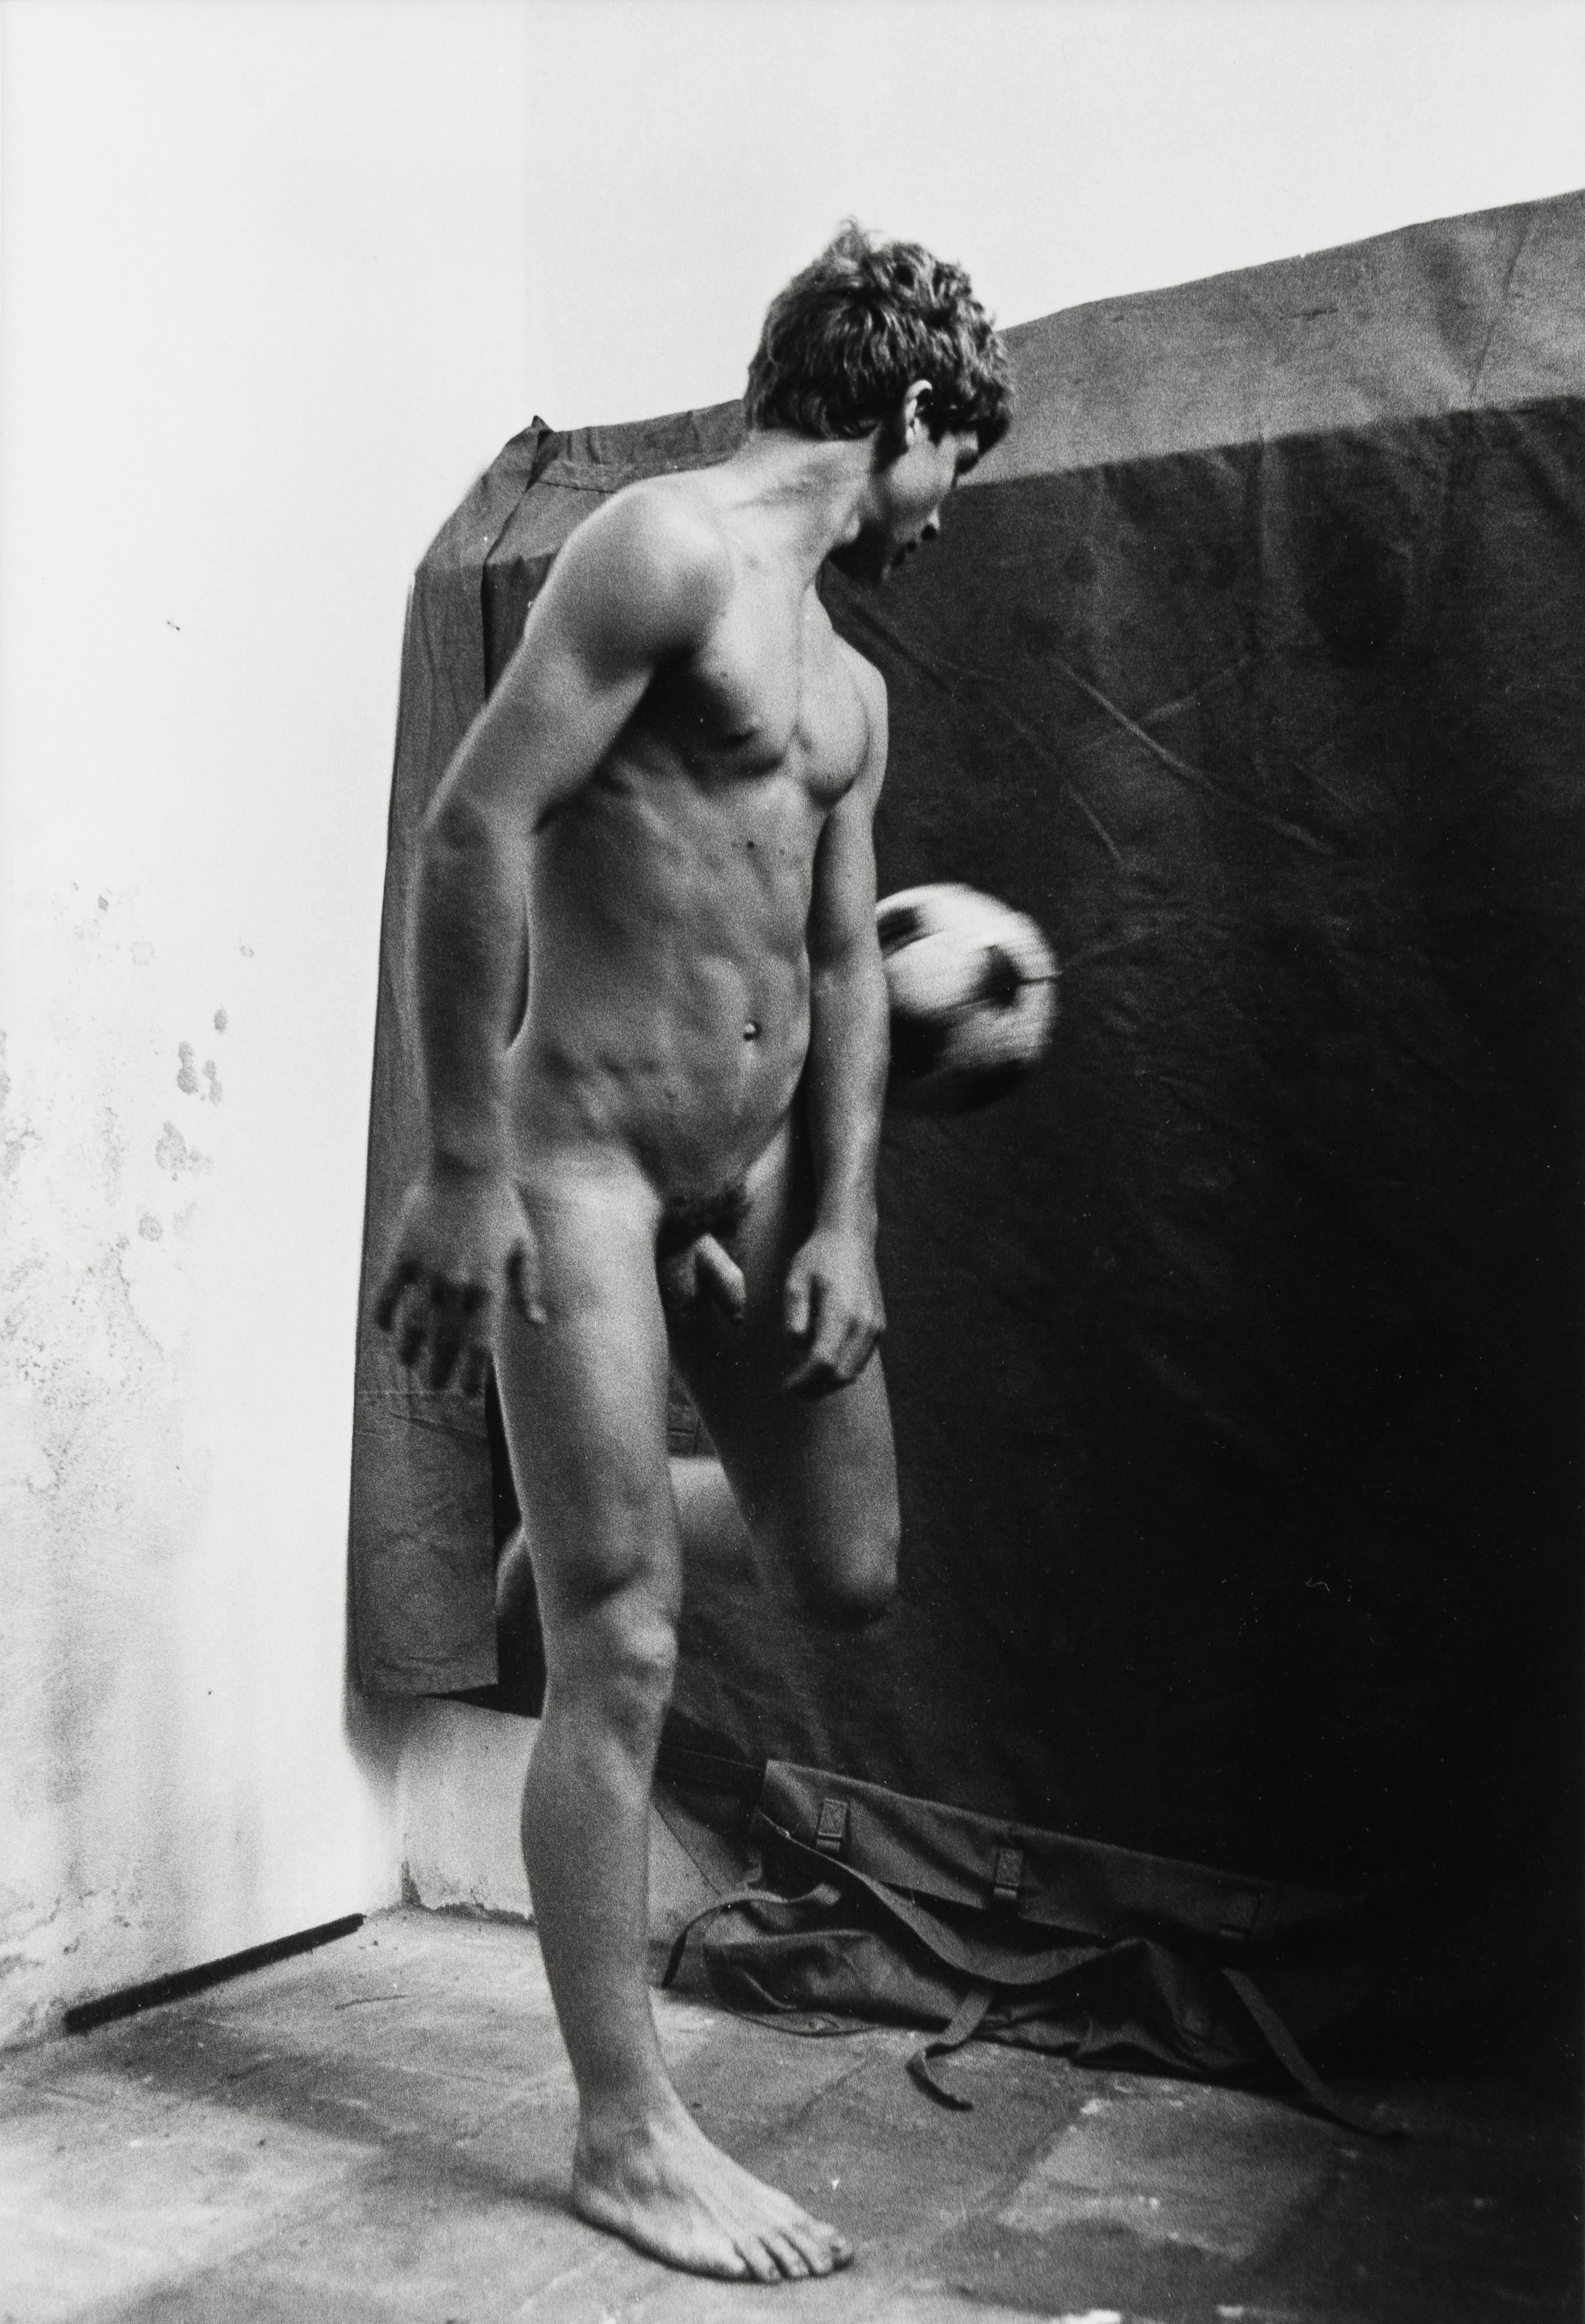 Oliviero with Ball, Casoli [(Neighborhood Boy) in Casoli]
1976/2013

Signed, titled, and dated in pencil, verso

Gelatin silver print

21.5 x 14.75 inches, image
25.5 x 20.25 inches, framed

Contact gallery for price.

This work is offered by